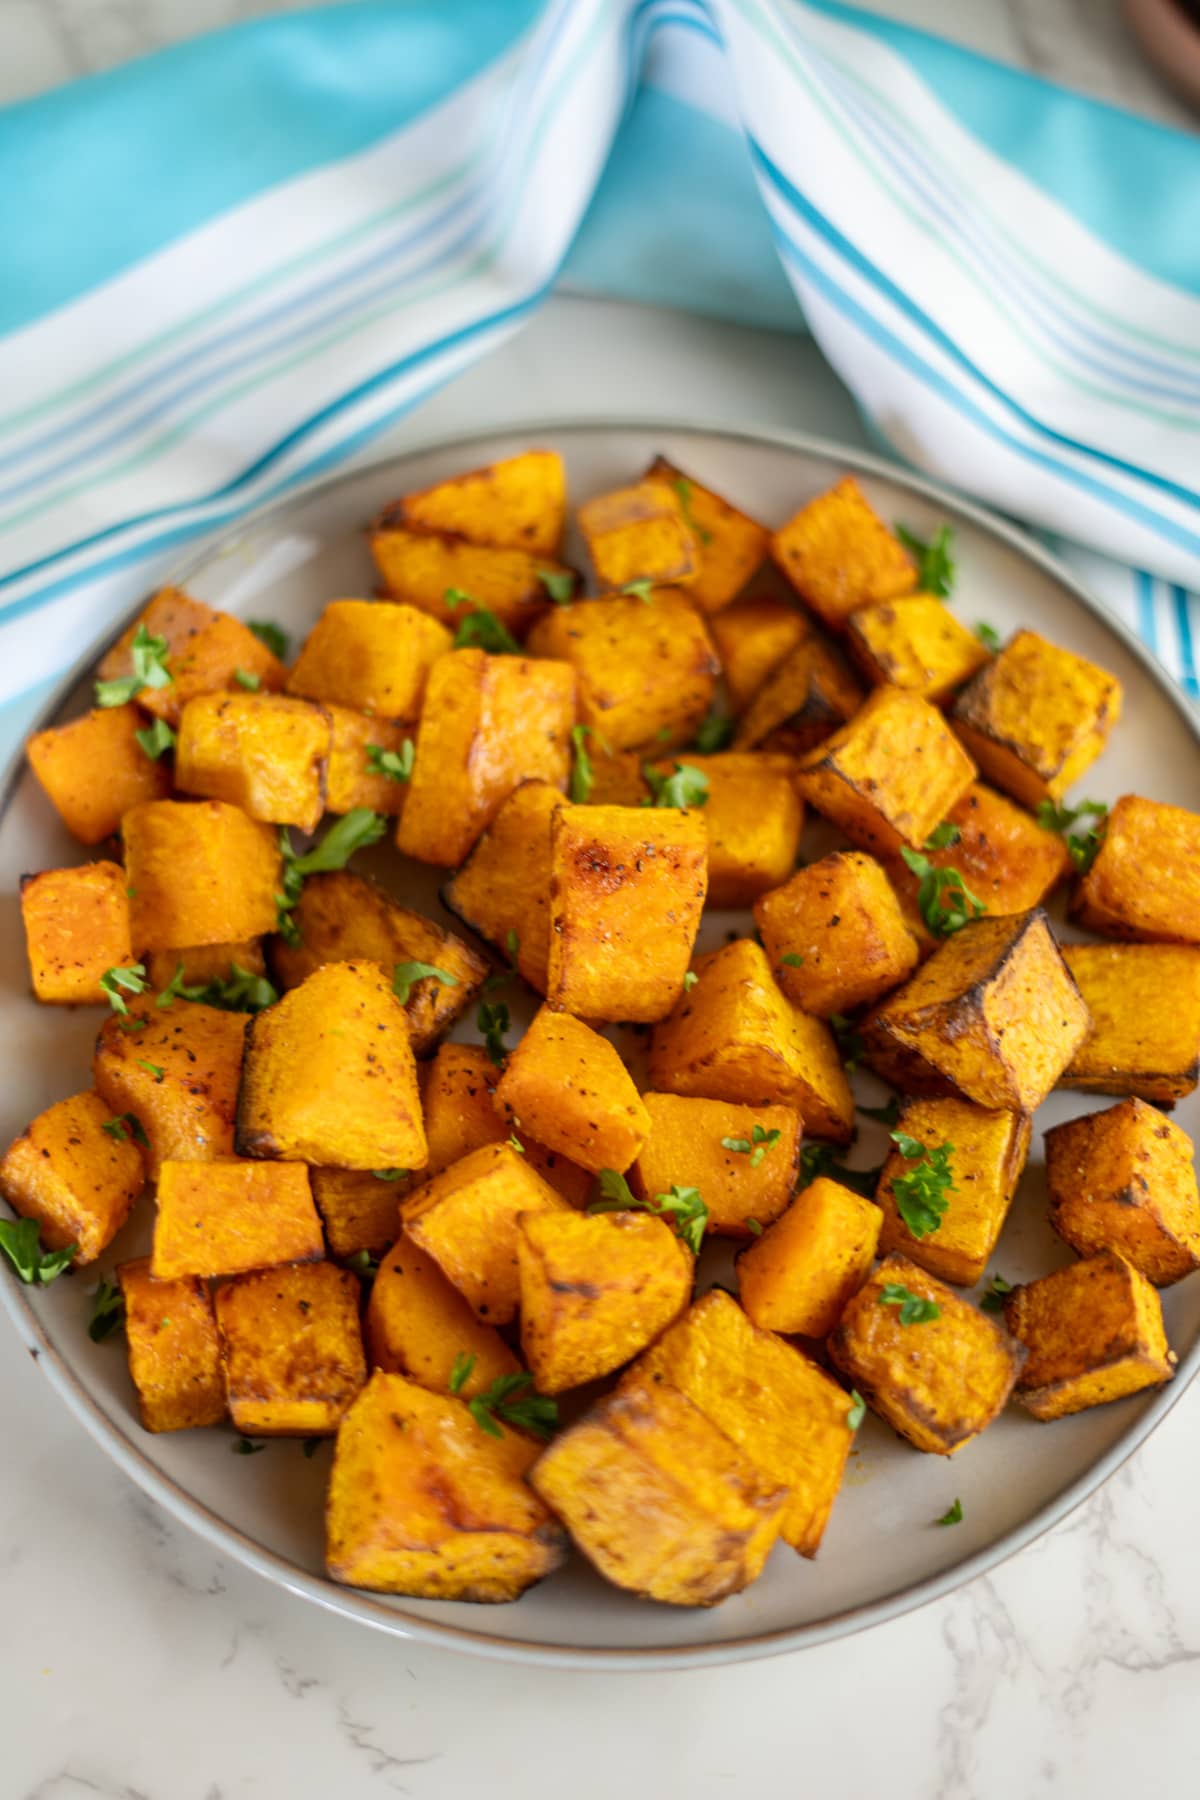 Roasted butternut squash cubes on a plate.